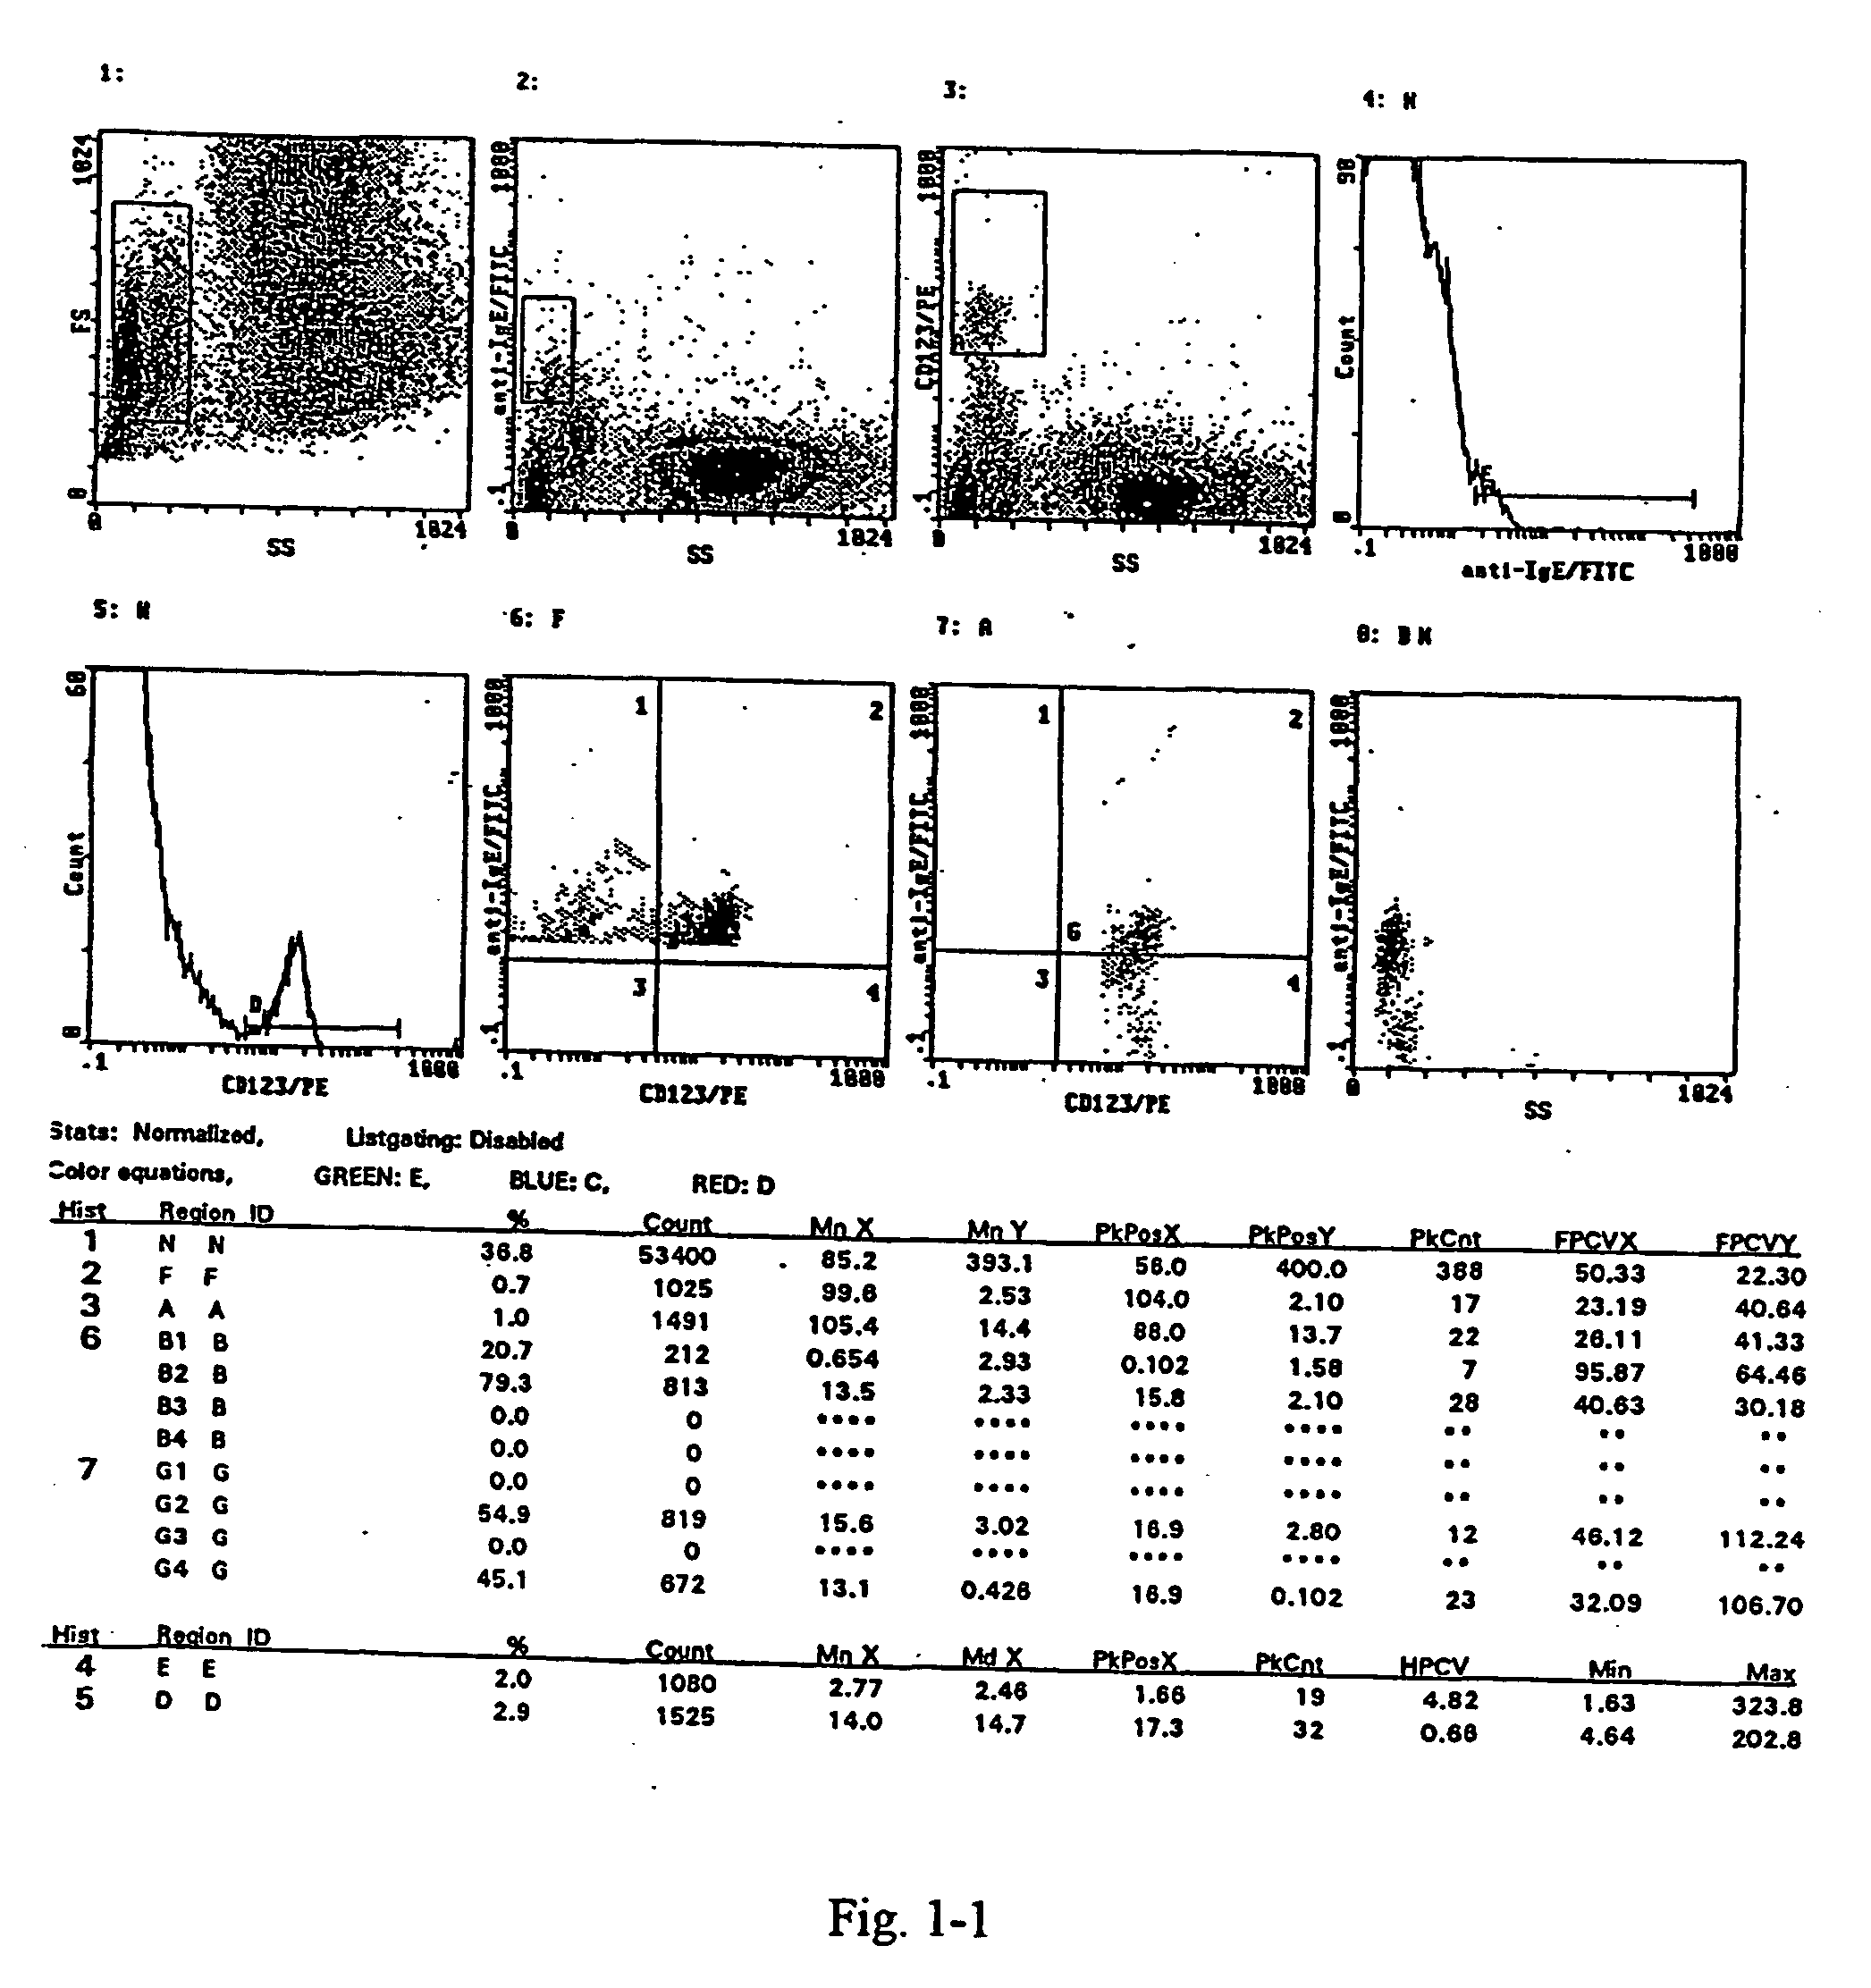 Method and kit for the measurement of the activation of basophils induced by allergen to determine hypersensitivity to some substances